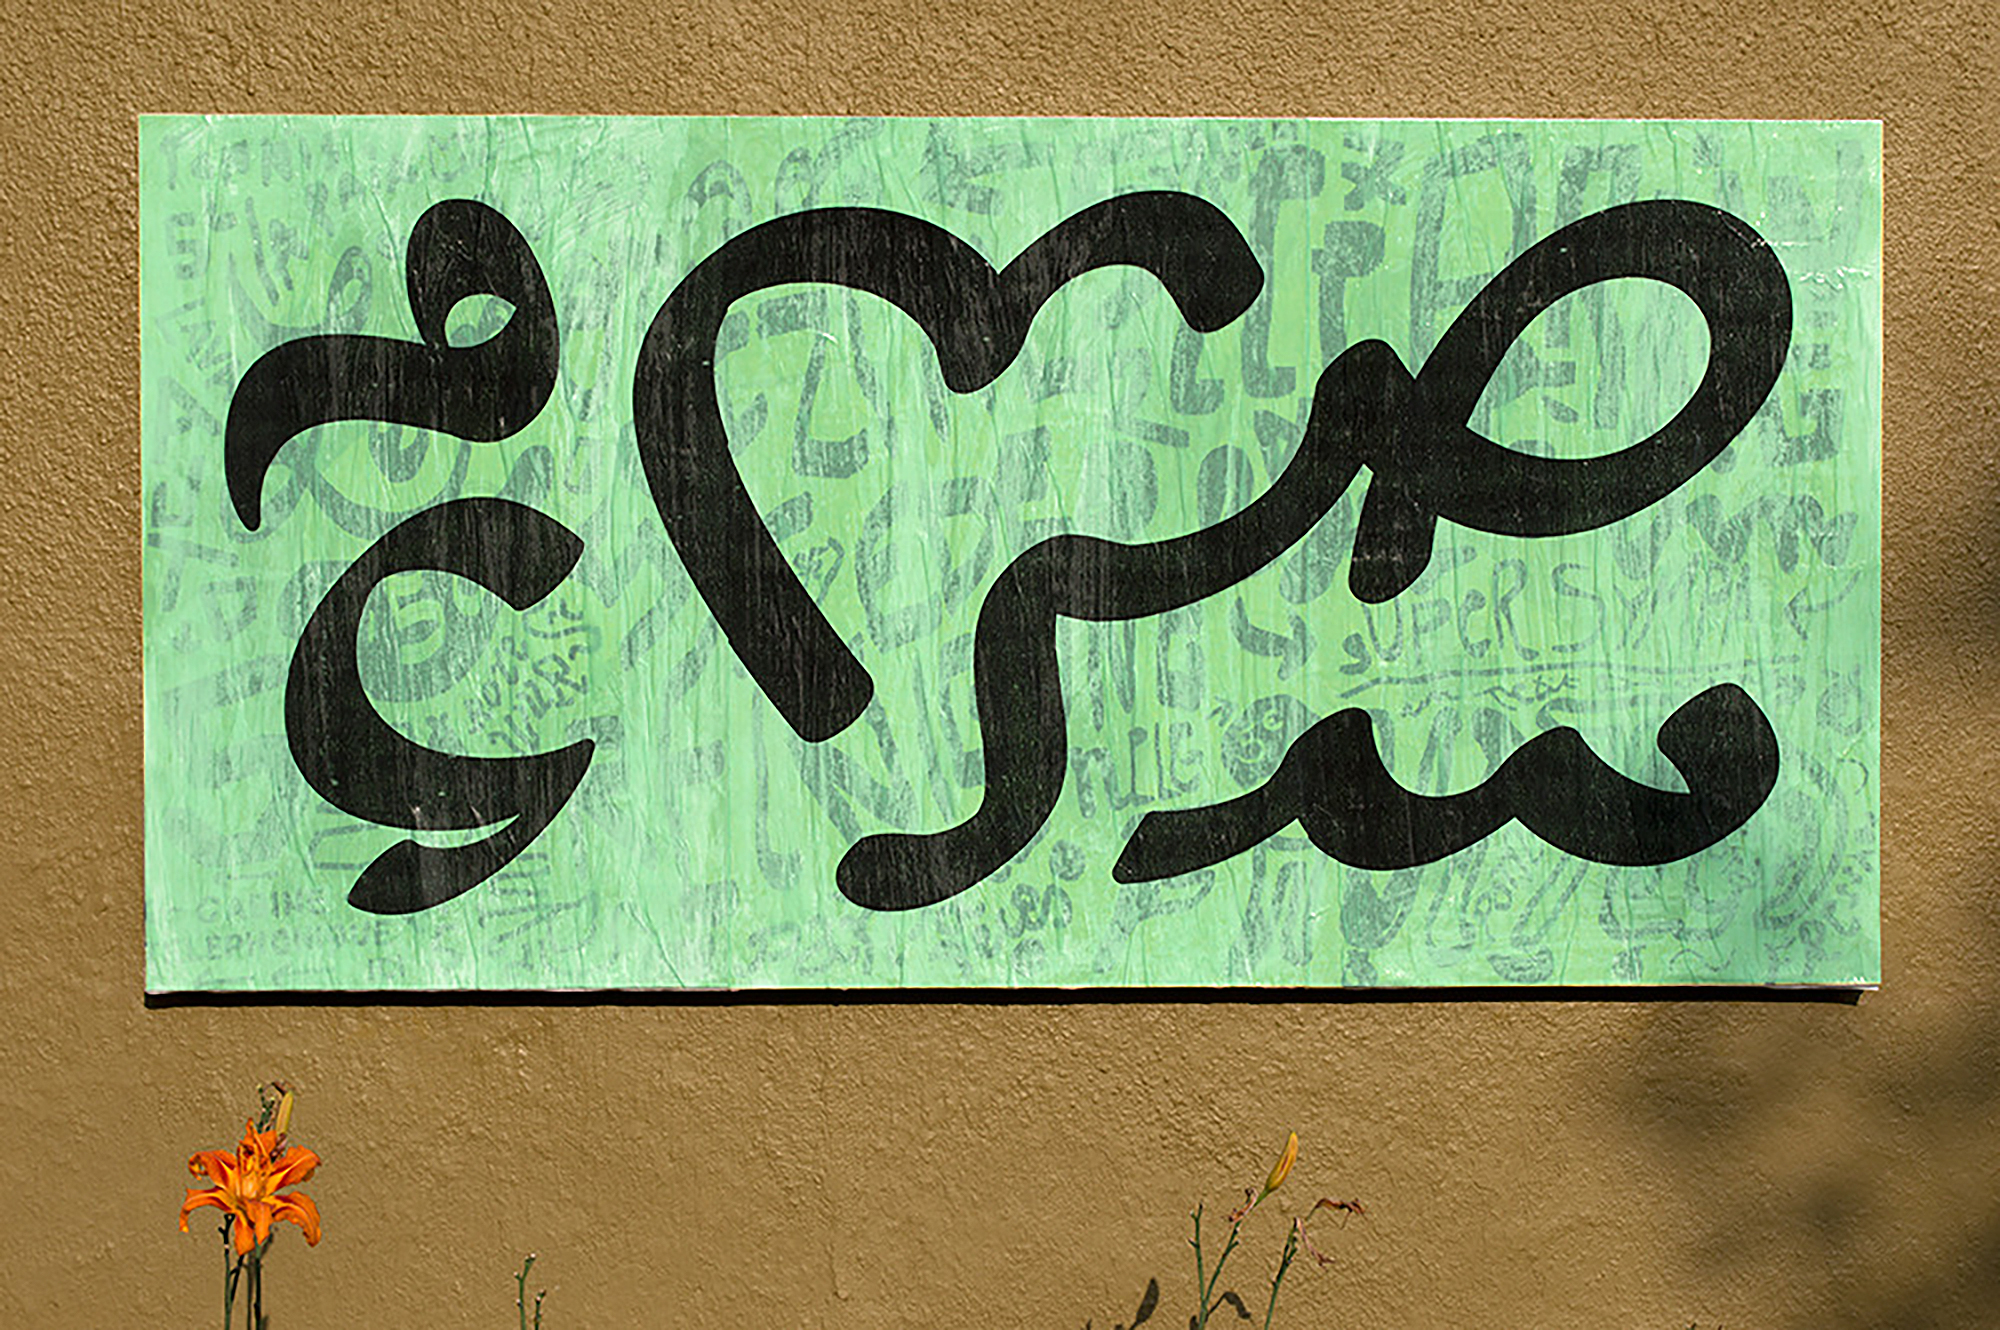 Arabic writing on a green tapestry